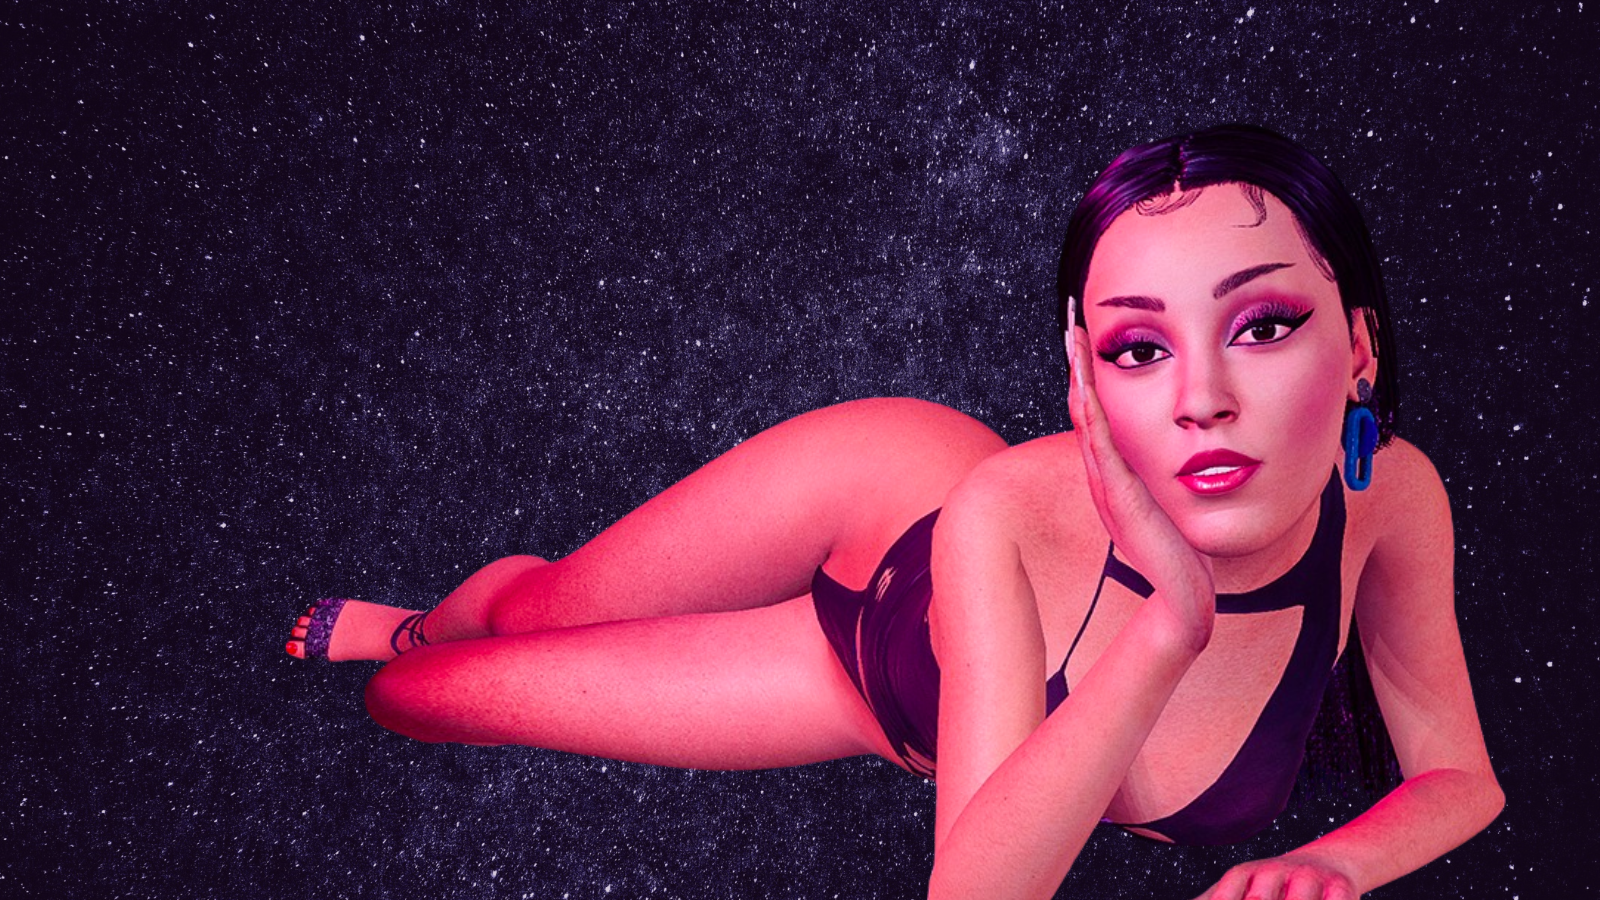 Doja Cat in Eek! Games' House Party, looking to crash the party